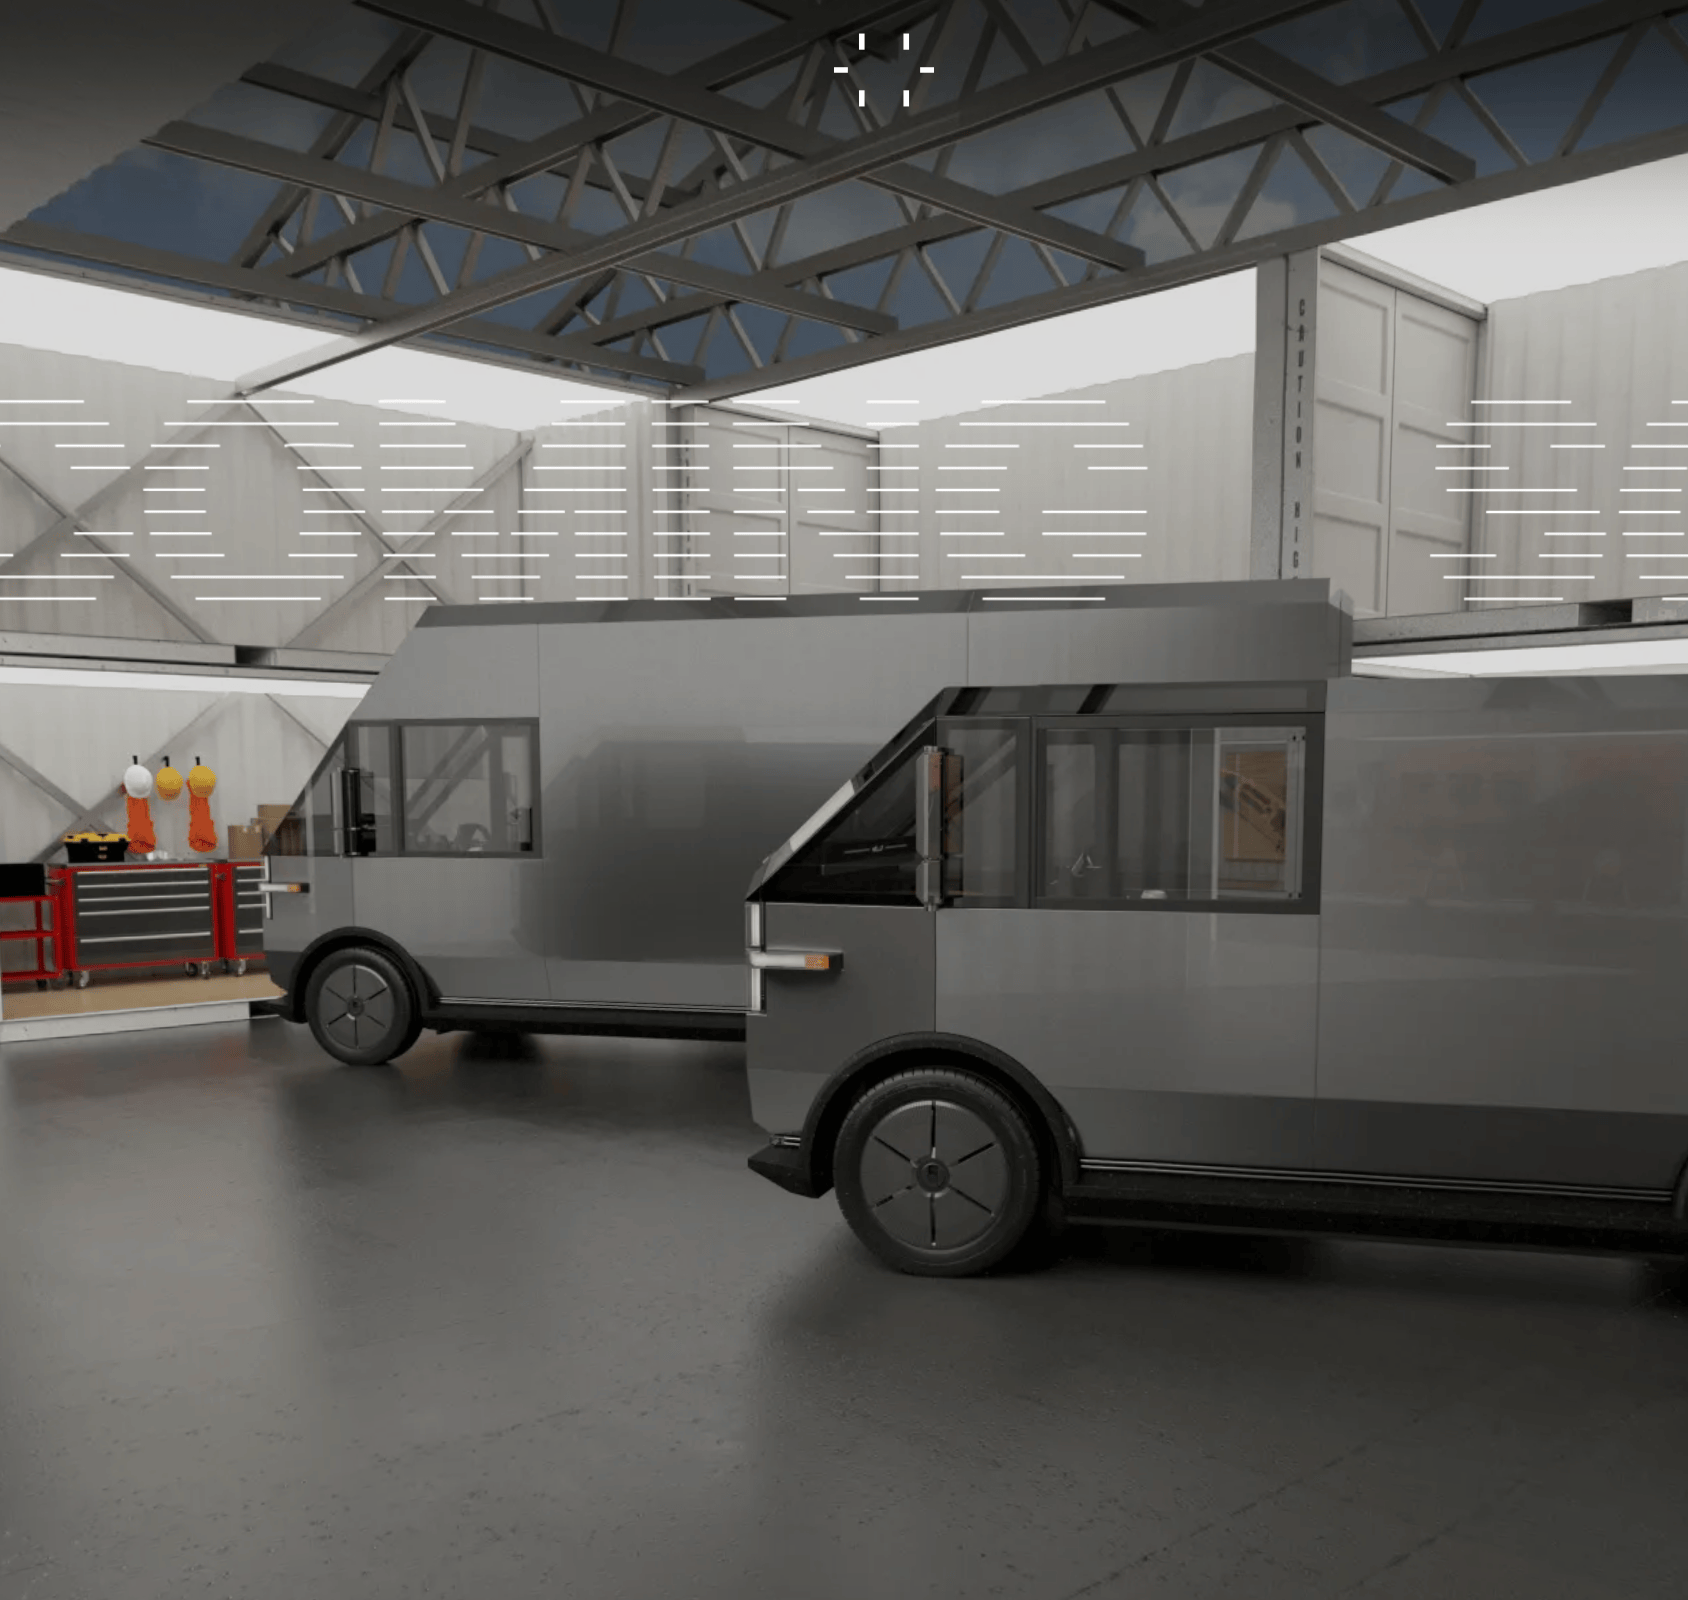 The MPDV variants like this RV and panel van are pure utility goodness wrapped in functional beauty.